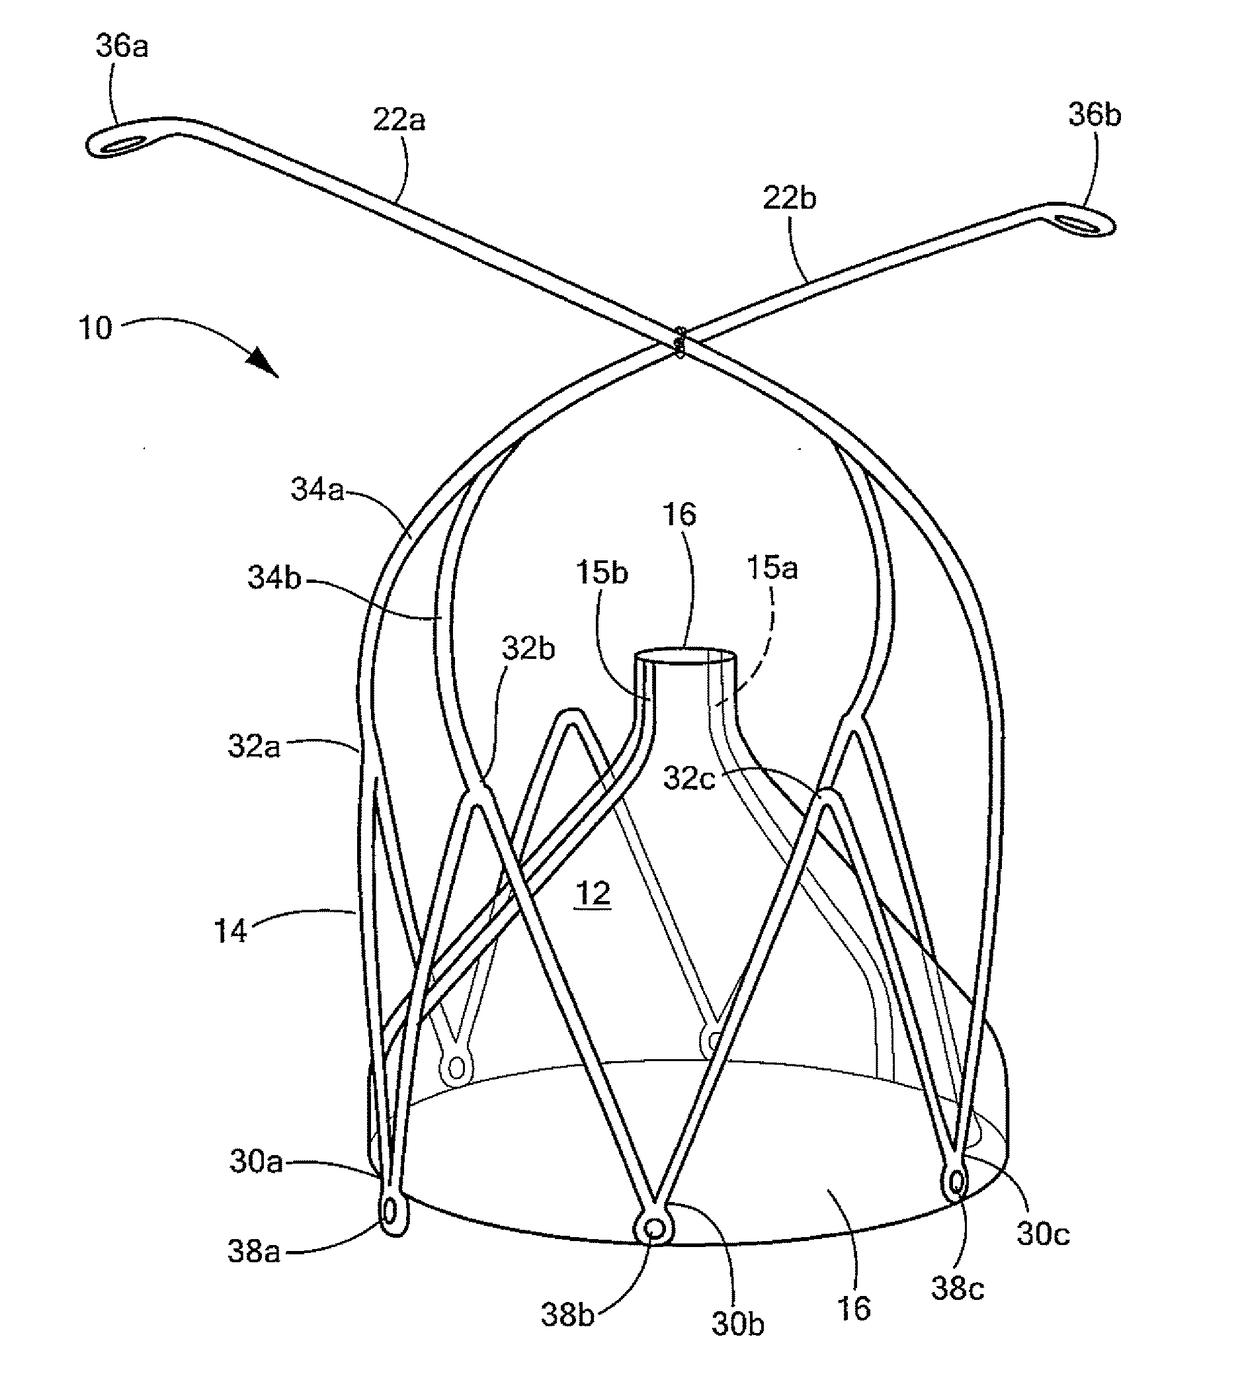 Transcatheter device and minimally invasive method for constricting and adjusting blood flow through a blood vessel